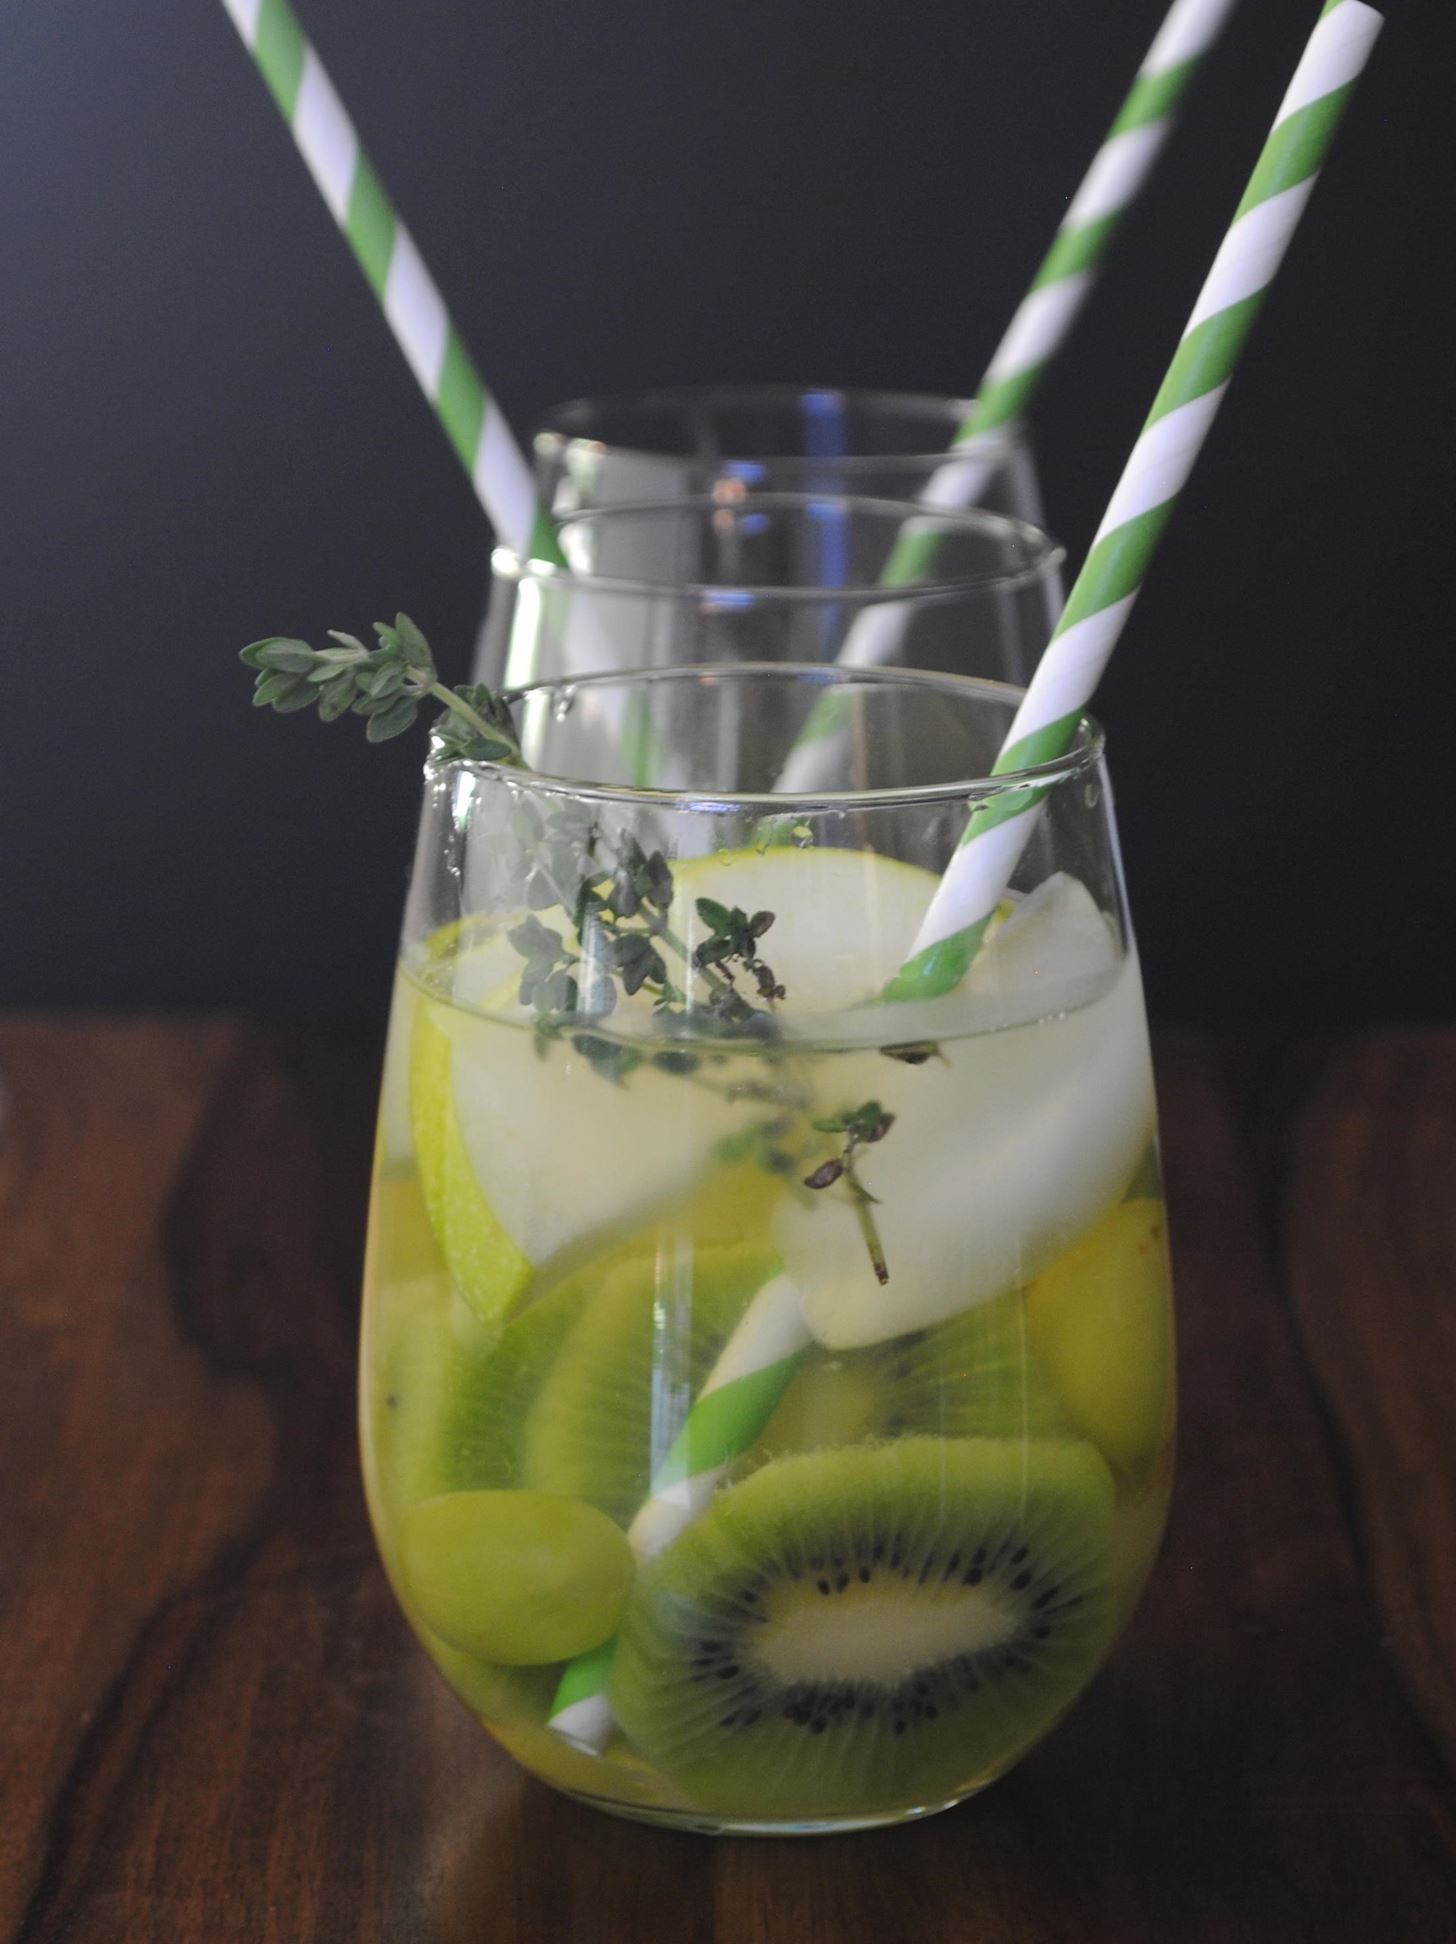 Scrap Your Standard Sangria—Make These Creative Combos Instead